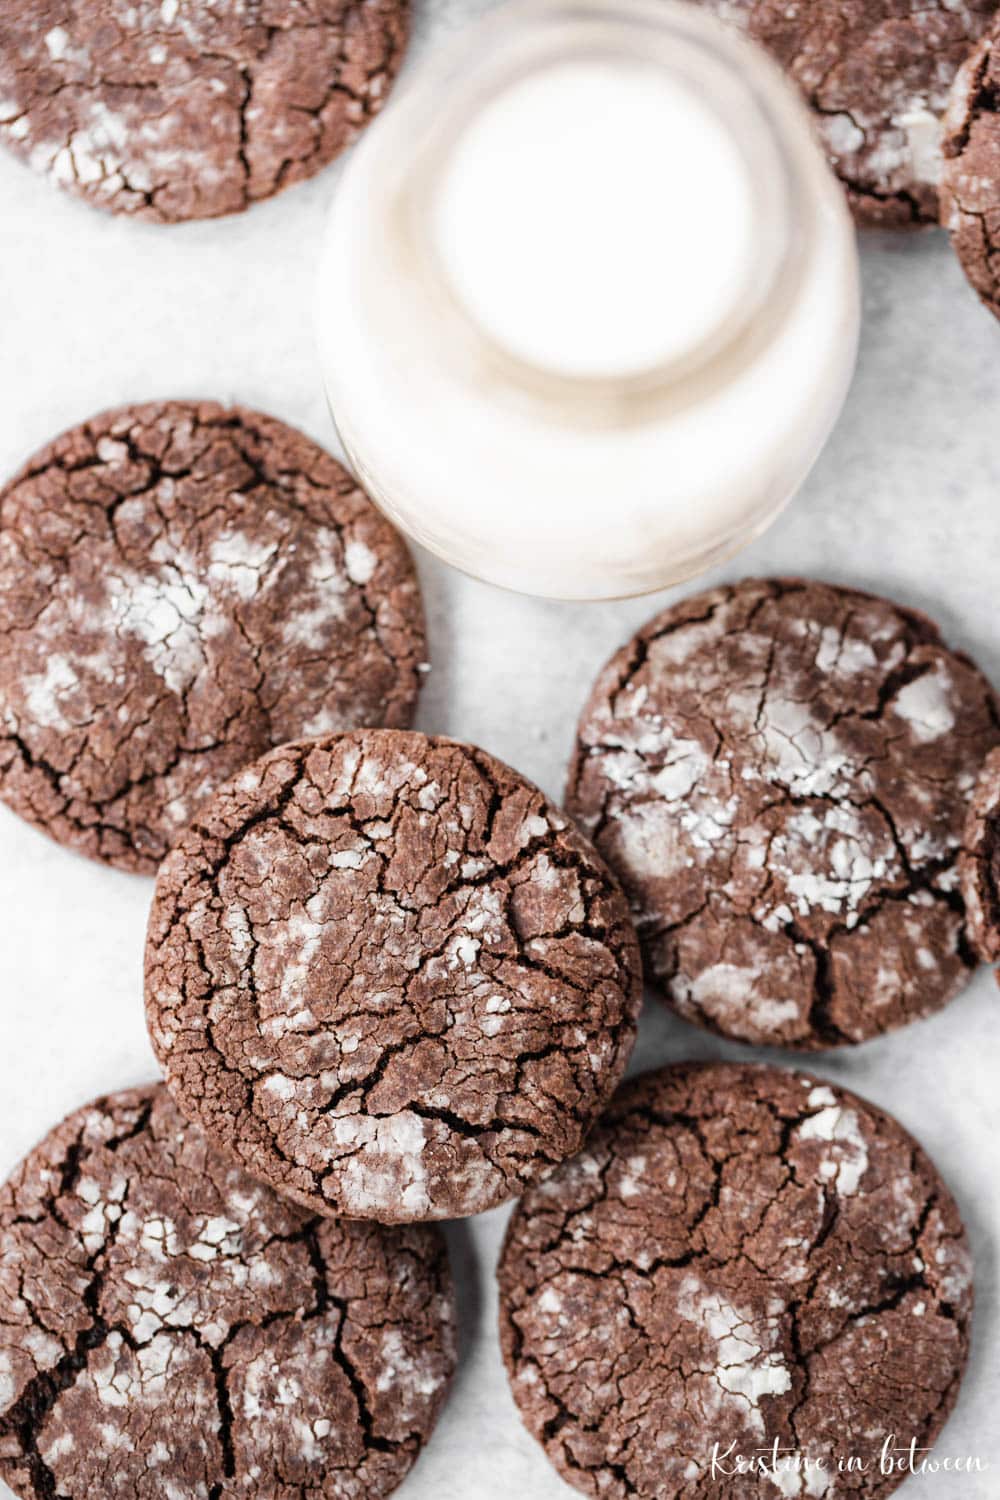 Chocolate cookies laying on parchment paper with a small jar of milk.